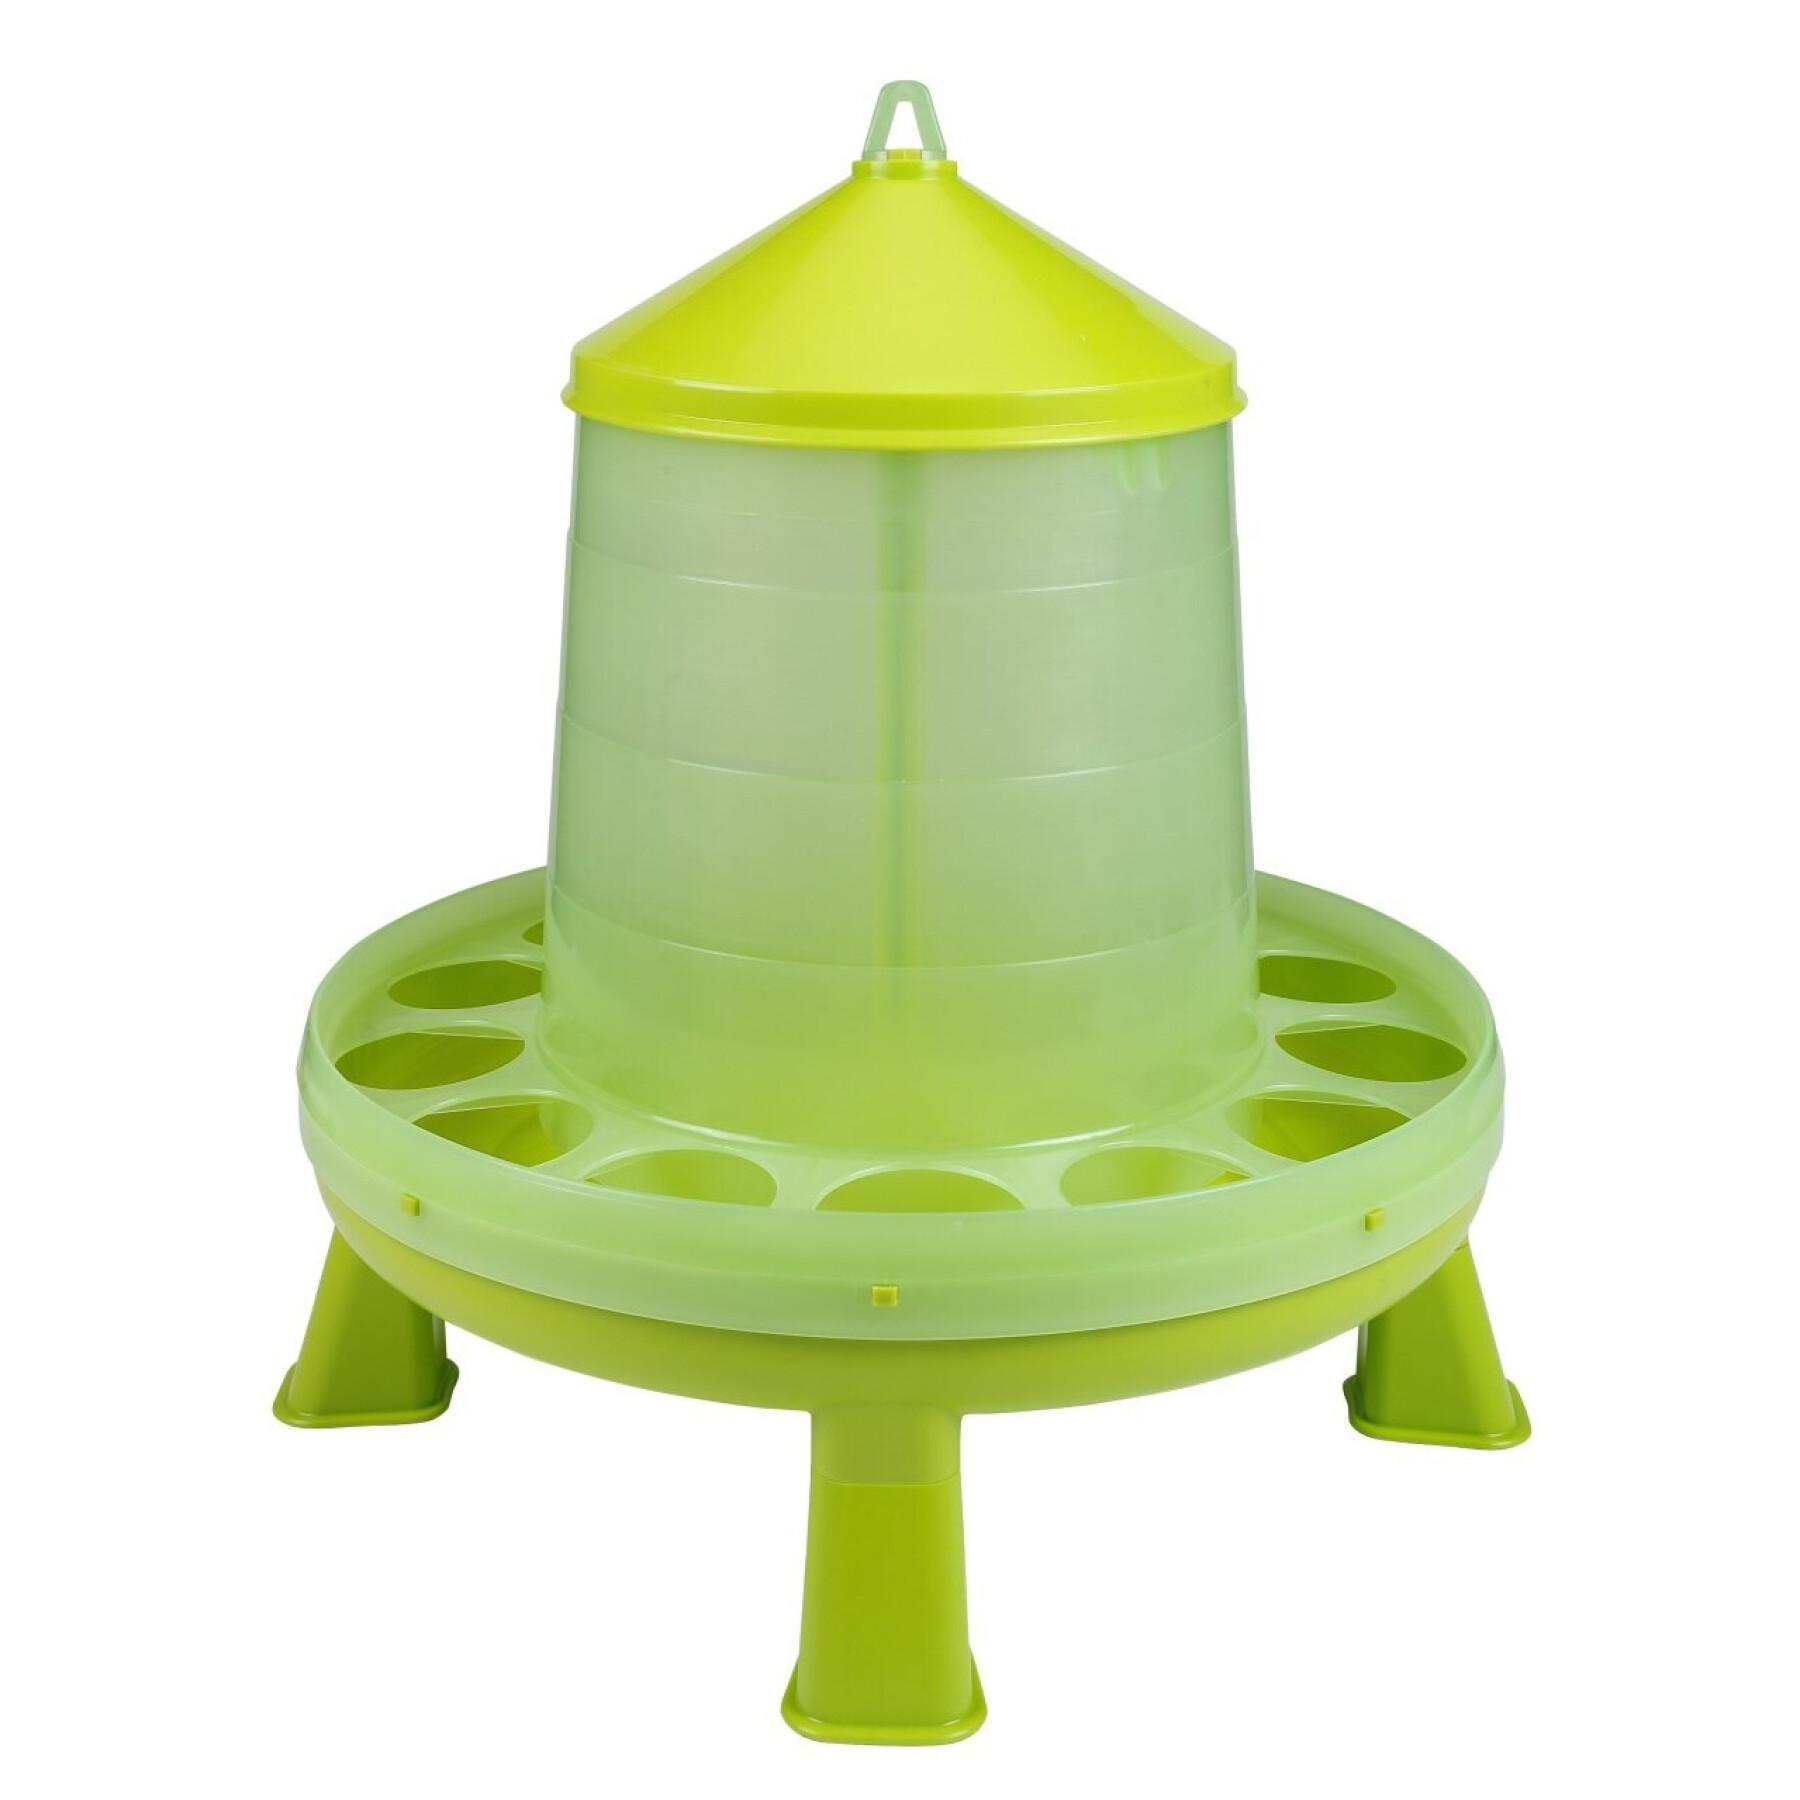 Free-standing poultry feeder Kerbl